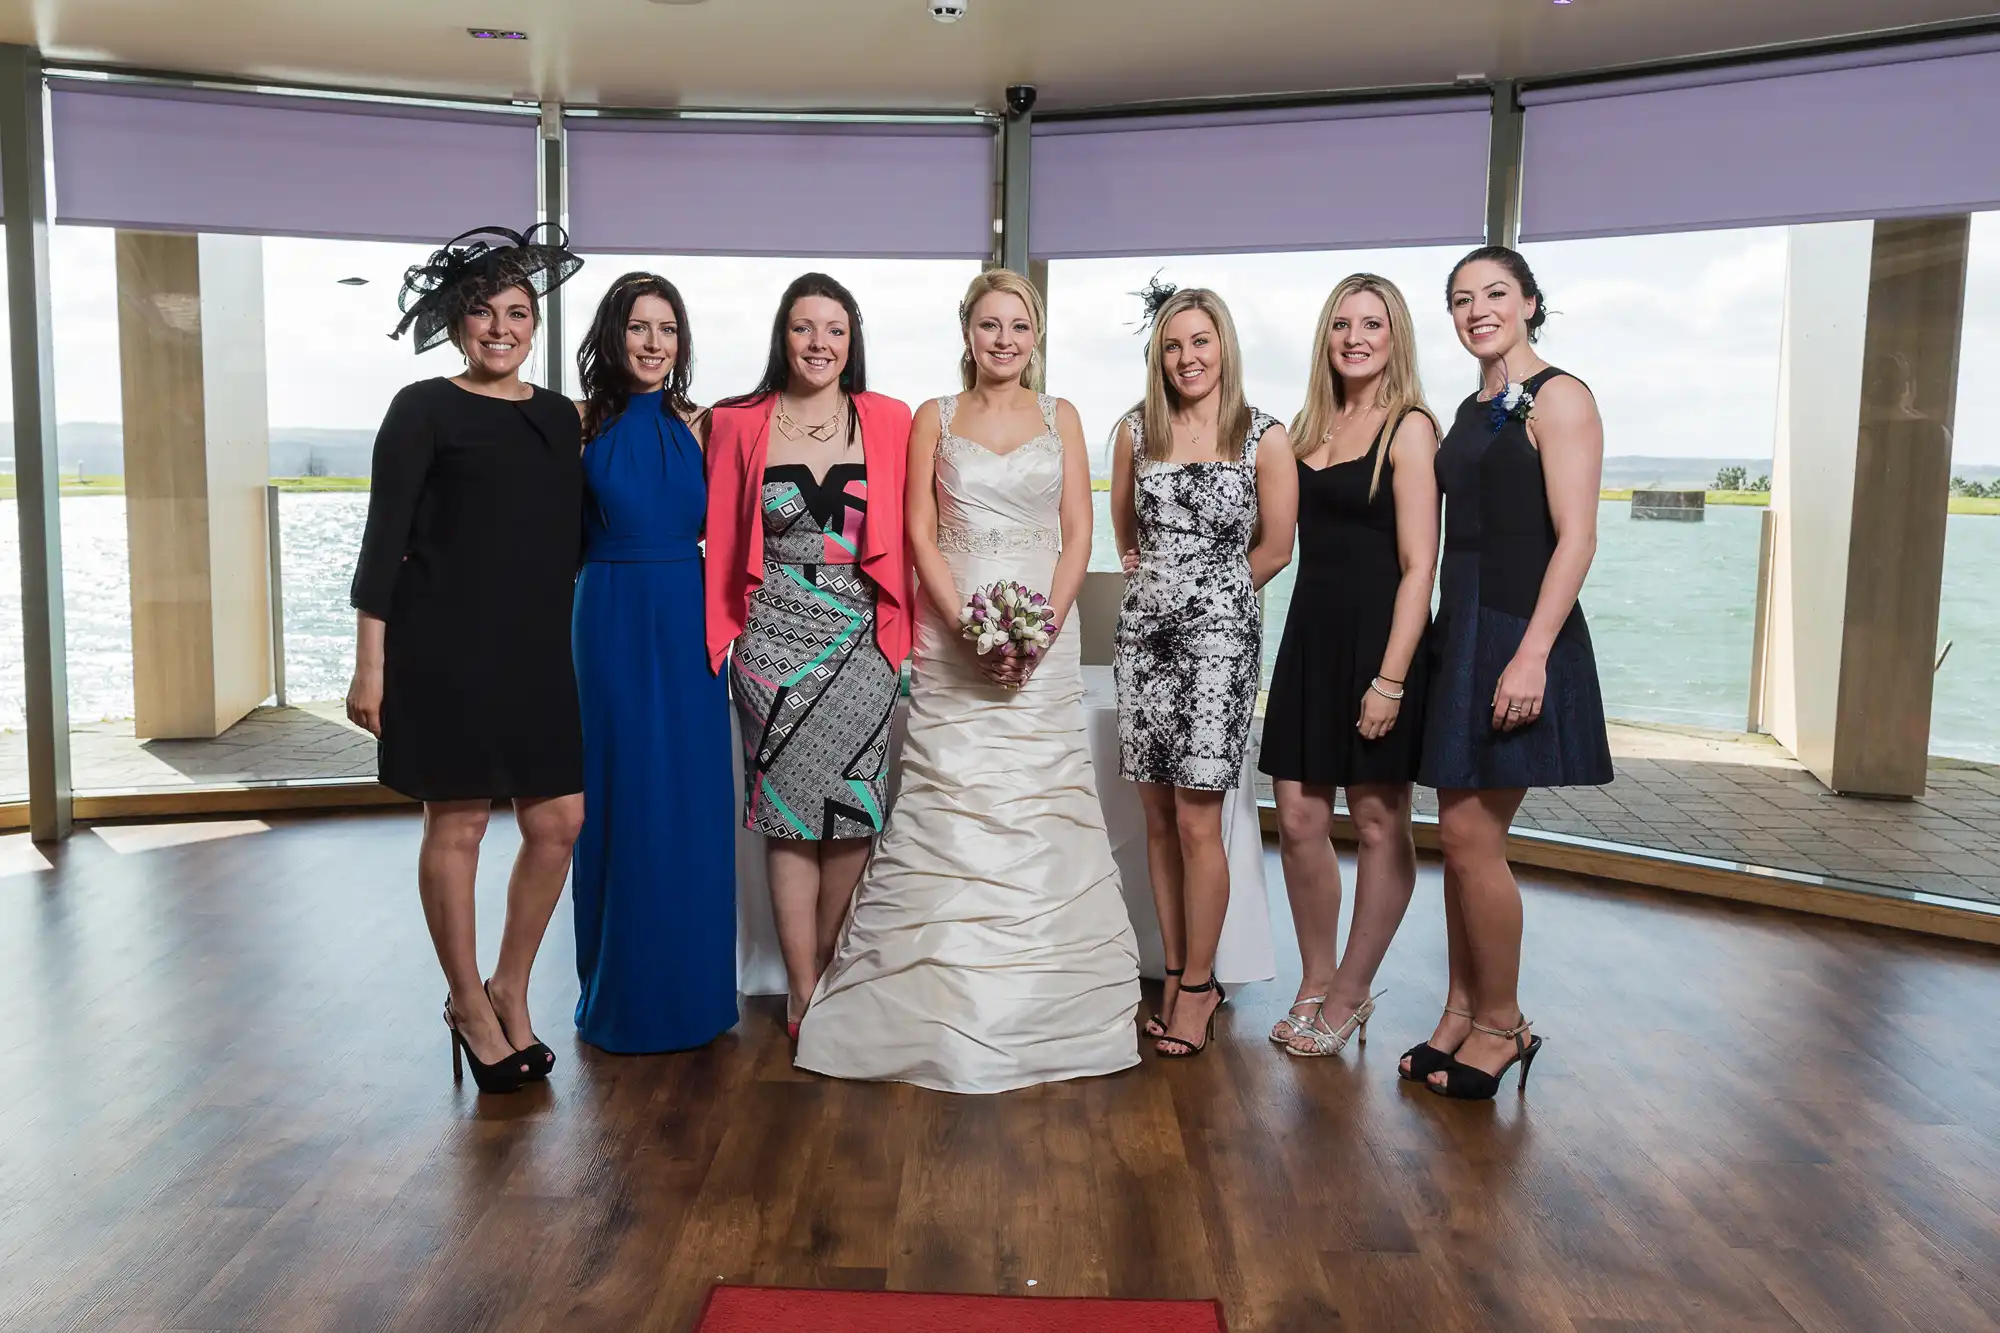 Seven women, including a bride, pose together indoors in front of large windows overlooking a body of water. they are dressed in a mix of colorful formal attire and smiles.